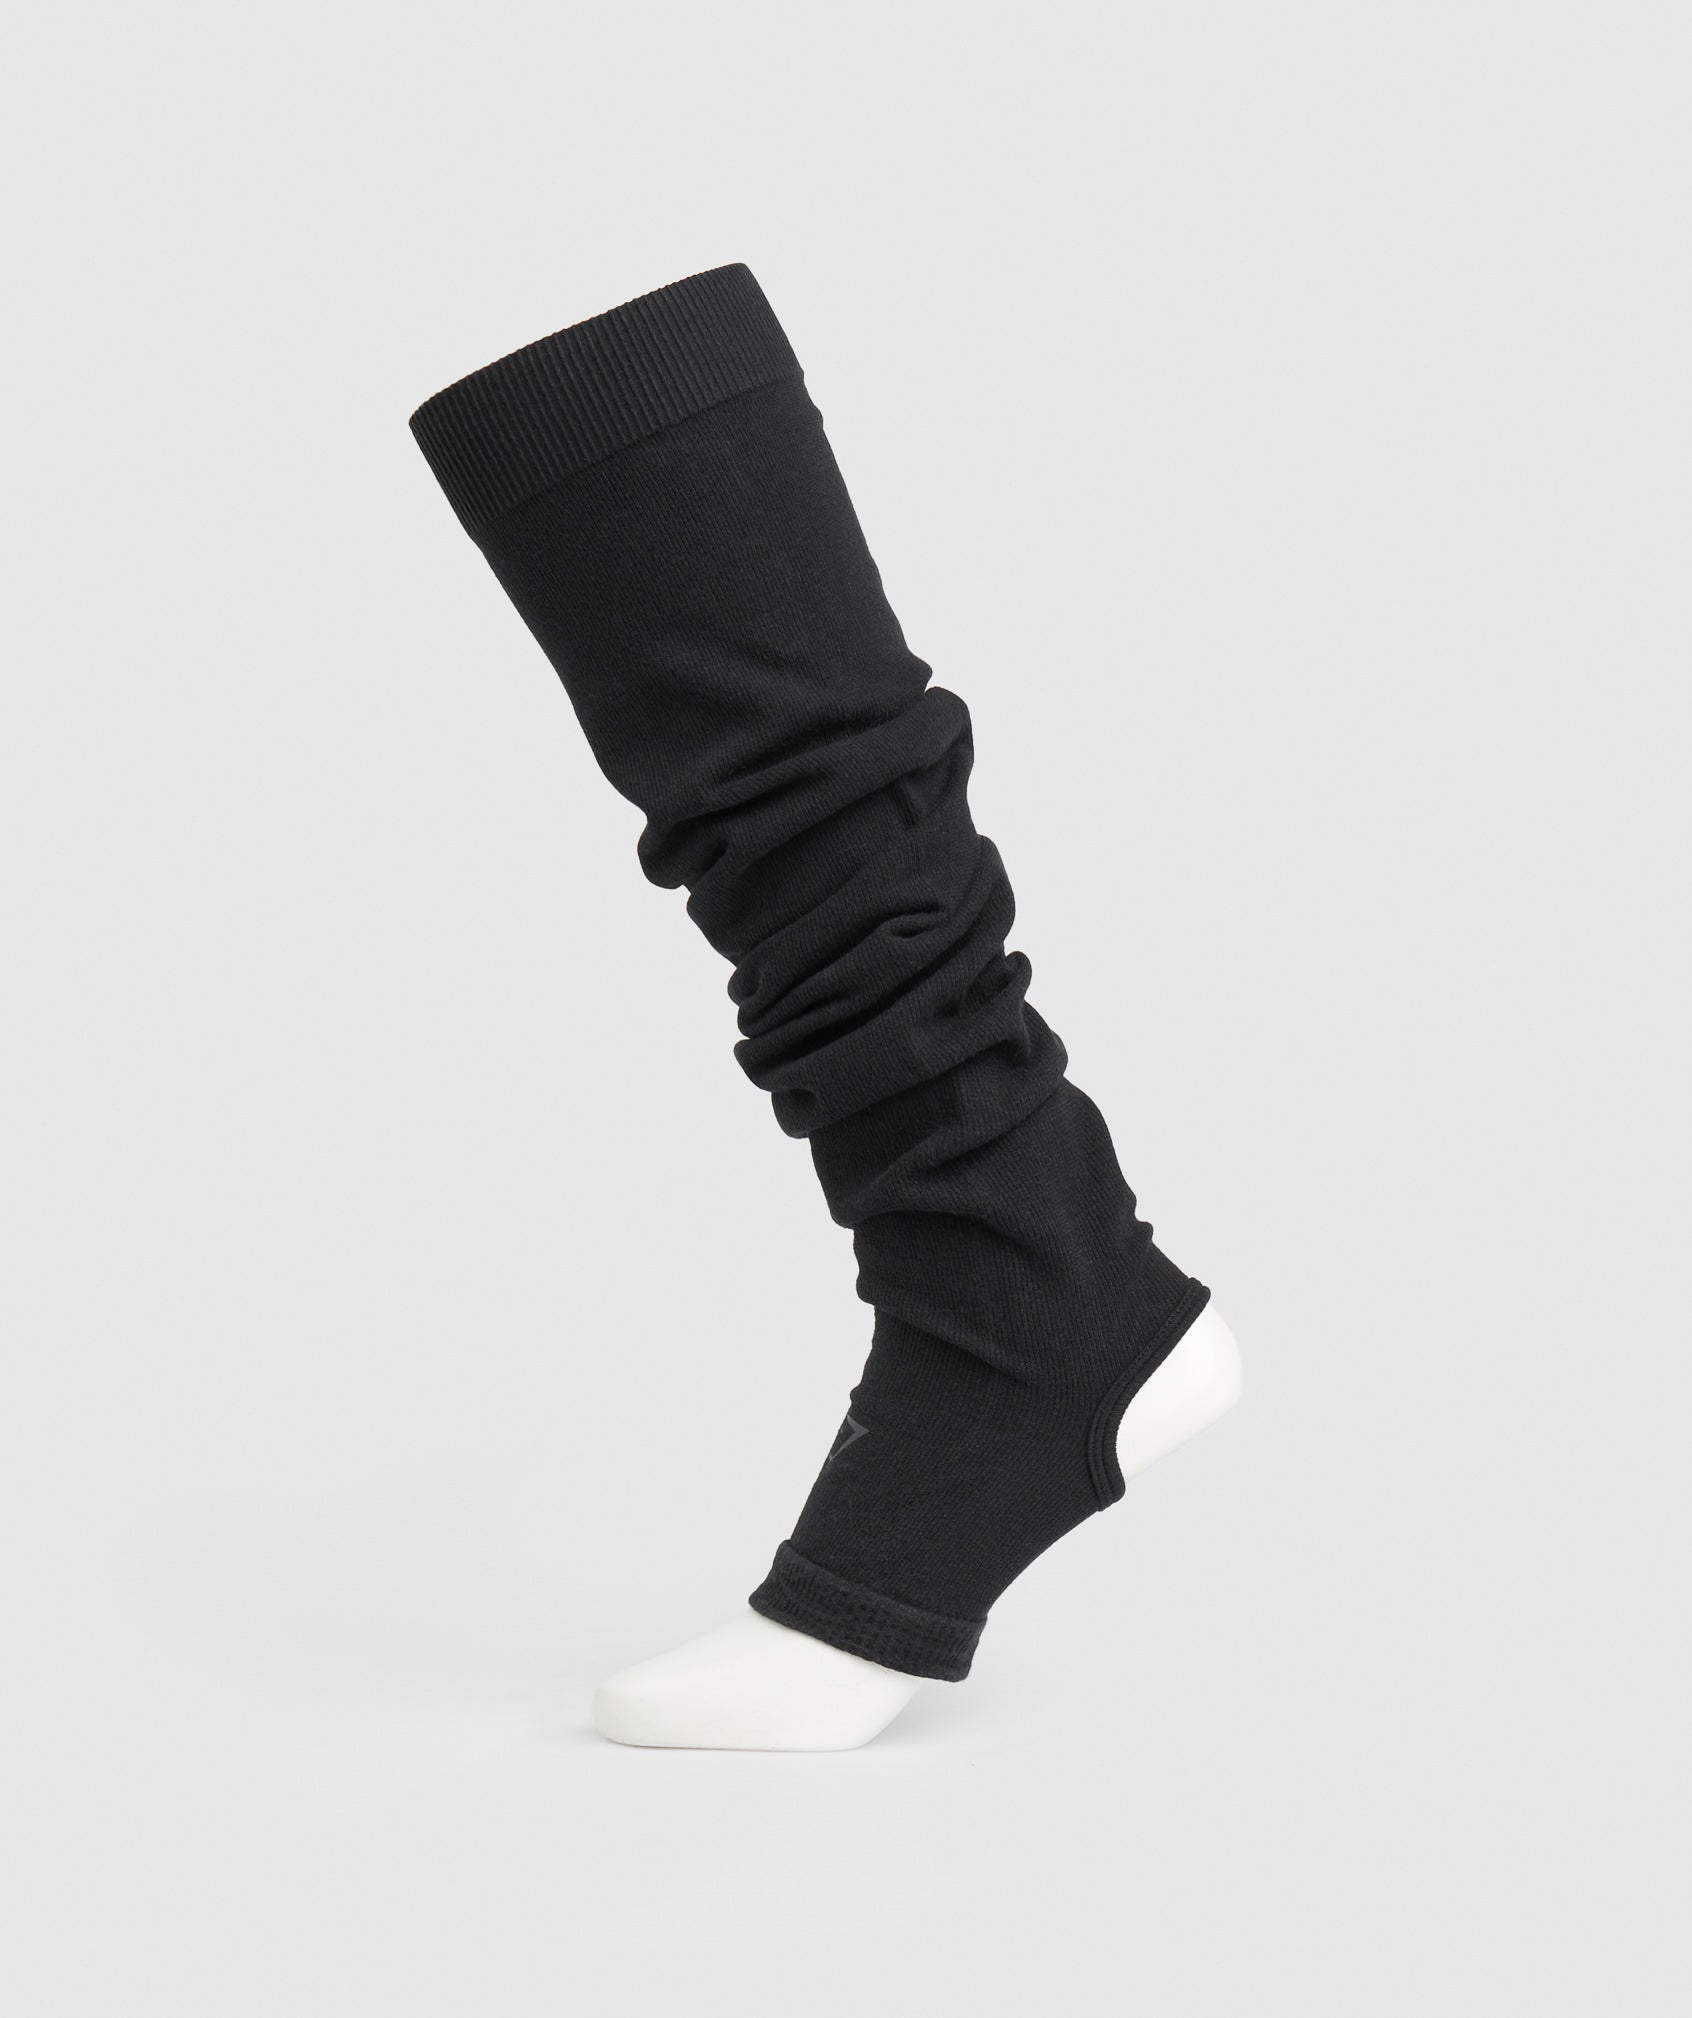 Ribbed Cotton Seamless Leg Warmers in Black